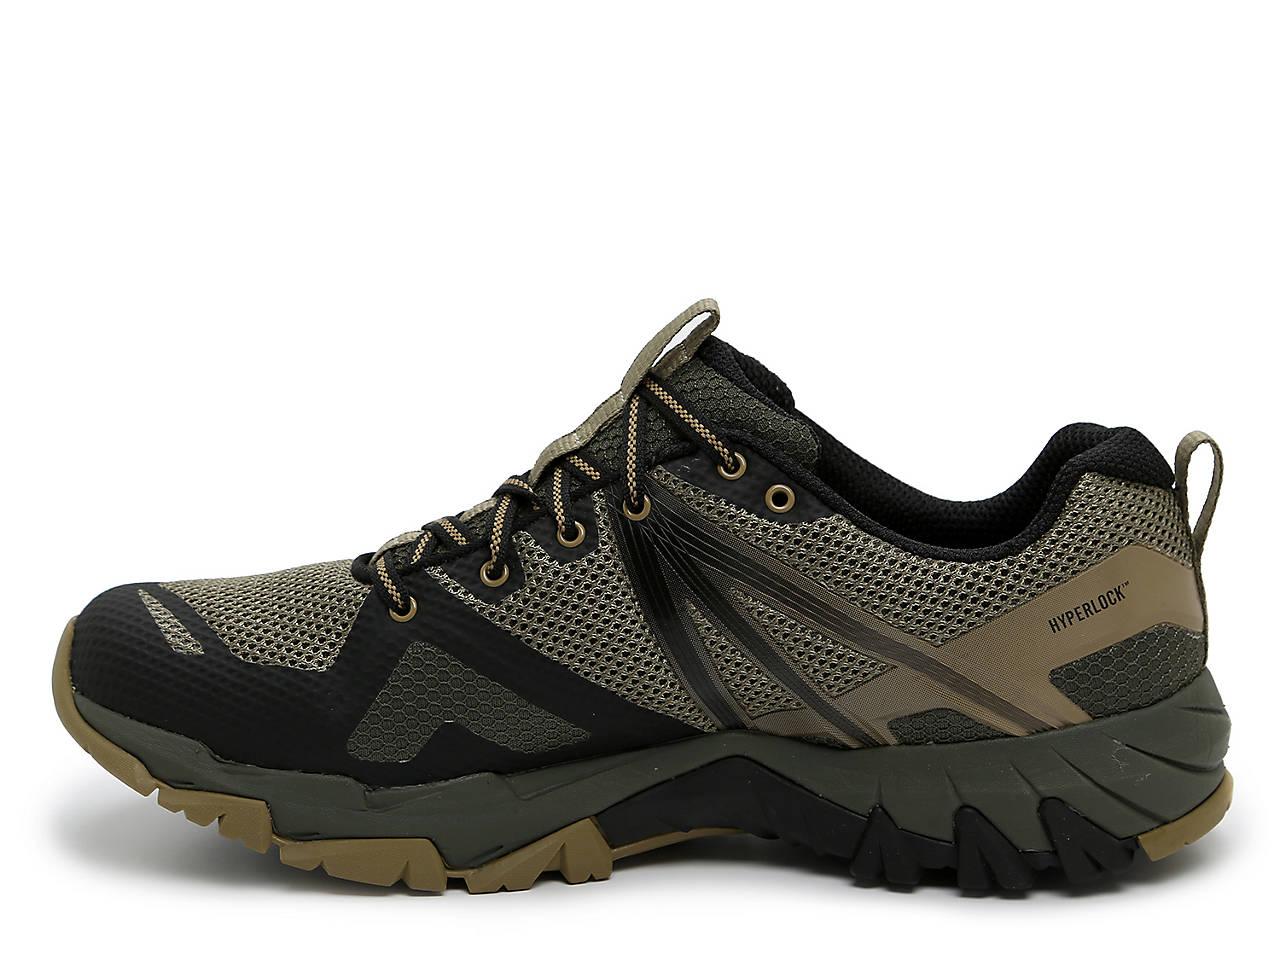 Merrell Synthetic Mqm Flex Trail Shoe in Olive (Green) for Men - Lyst